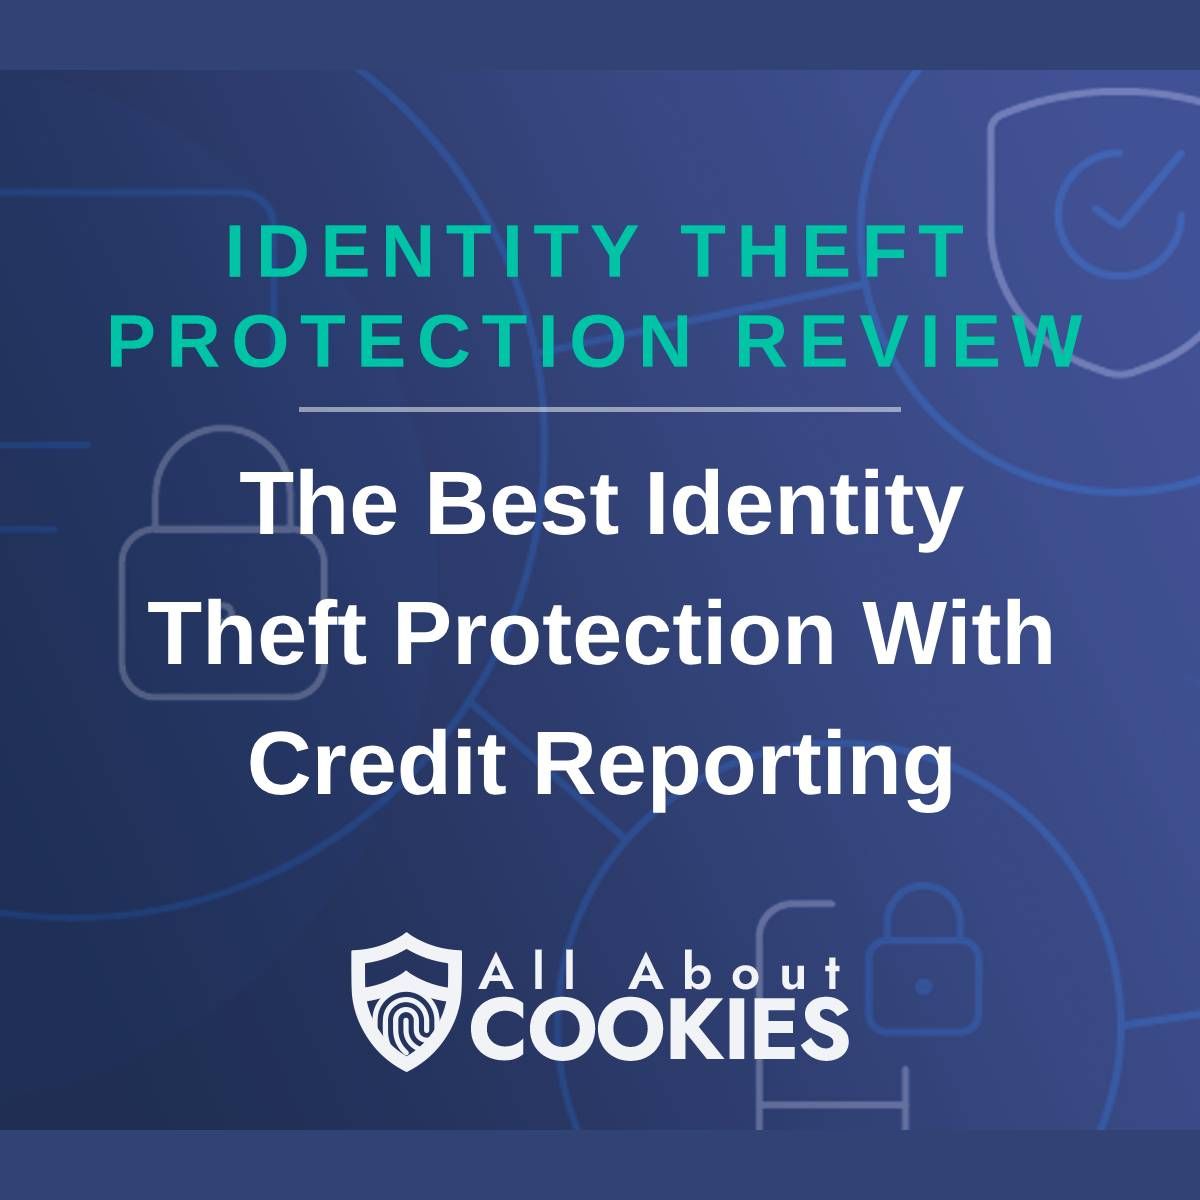 A blue background with images of locks and shields with the text &quot;Identity Theft Protection Review The Best Identity Theft Protection With Credit Monitoring&quot; and the All About Cookies logo. 